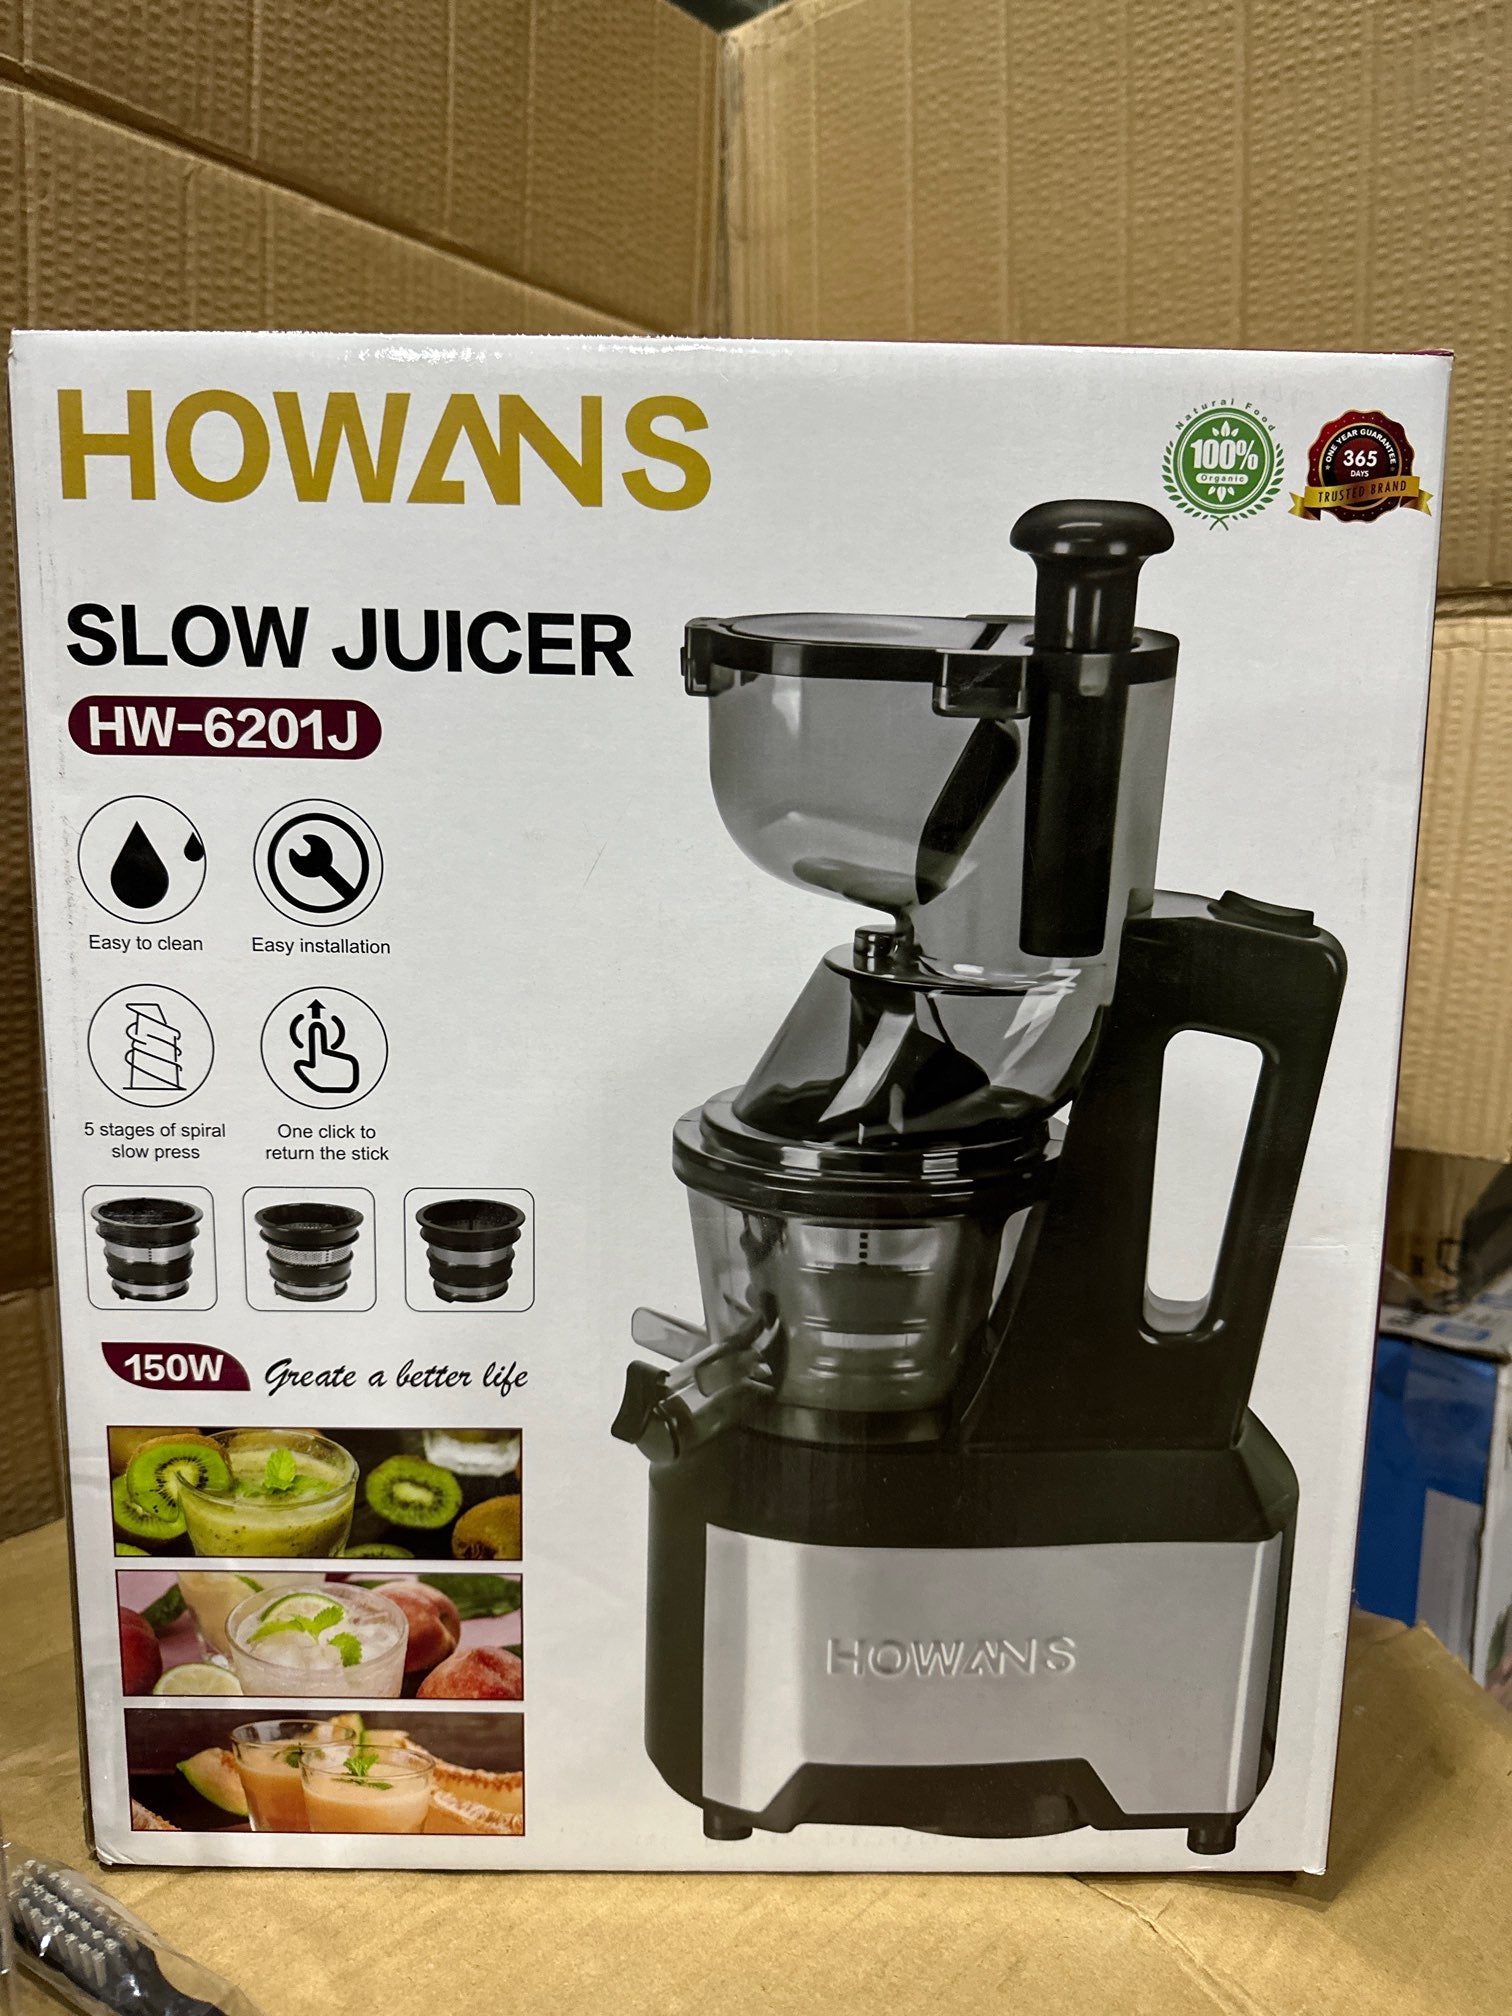 Lot imported Howans Slow juicer